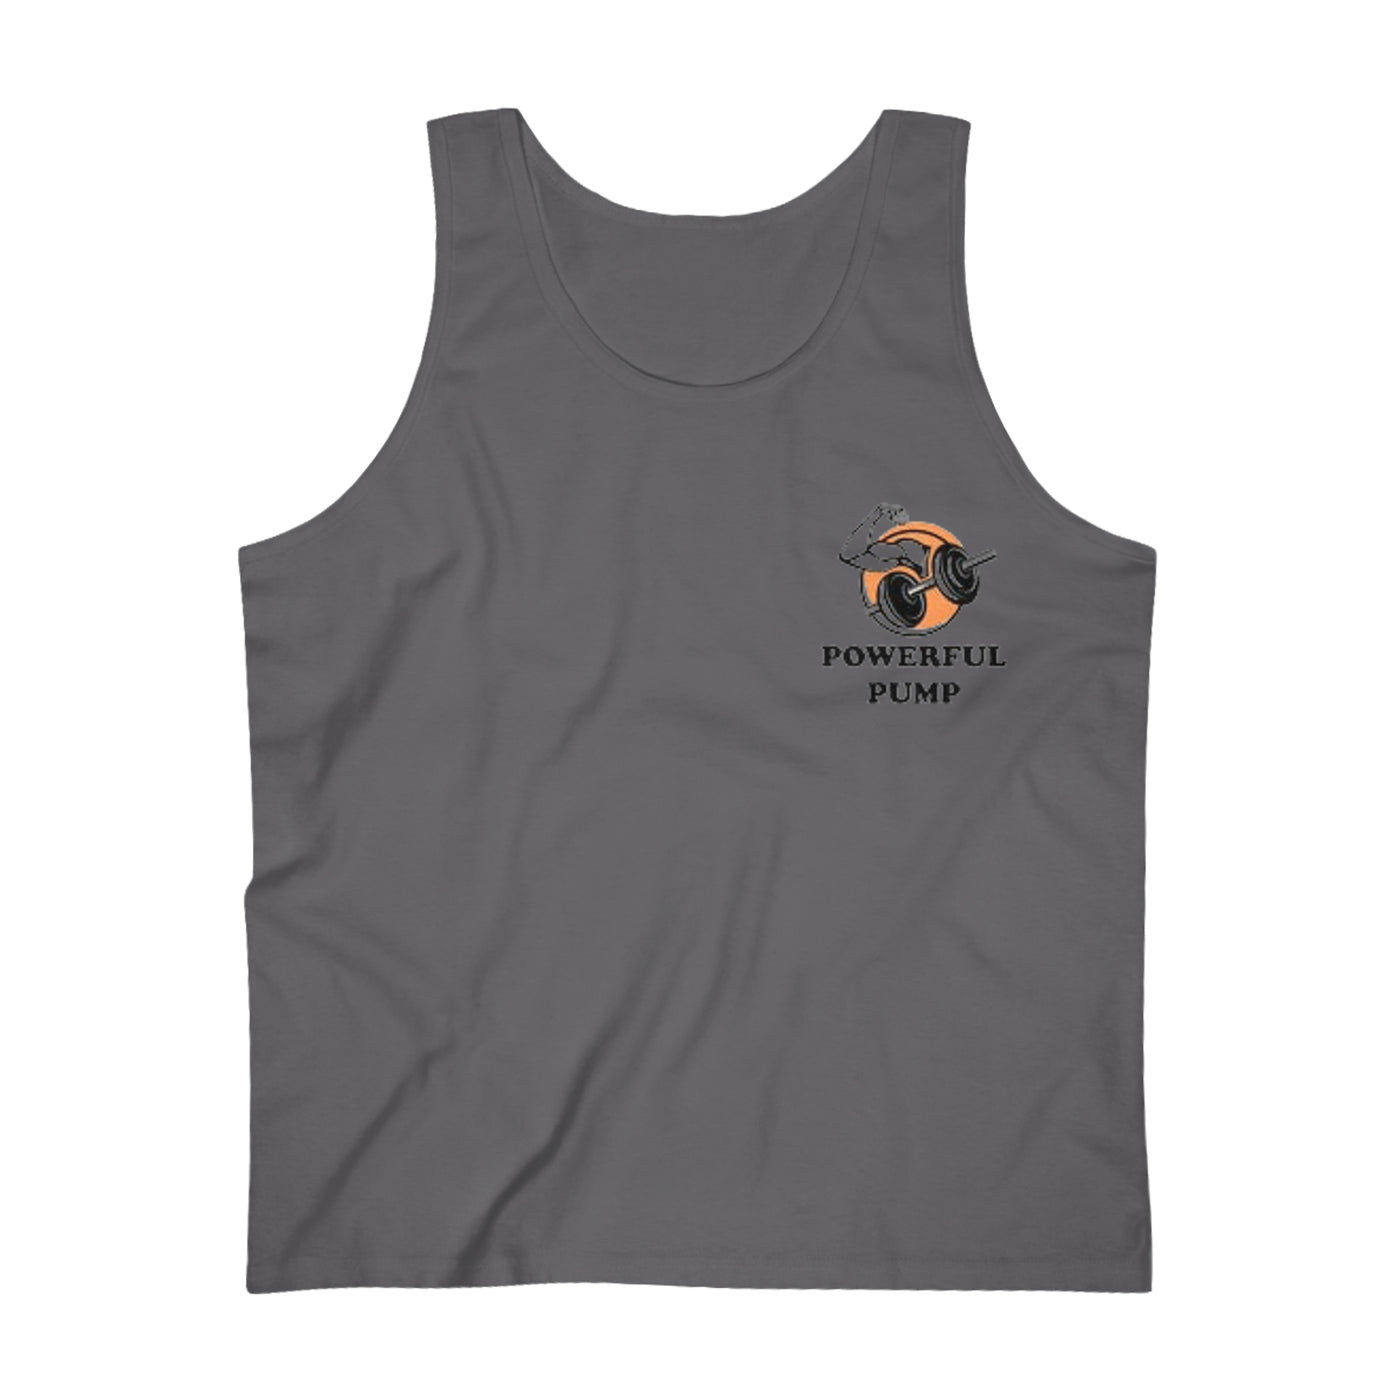  Men's Ultra Cotton Tank Top - Comfortable and versatile tank top for men, made of high-quality cotton fabric, suitable for various activities including workouts and casual wear.